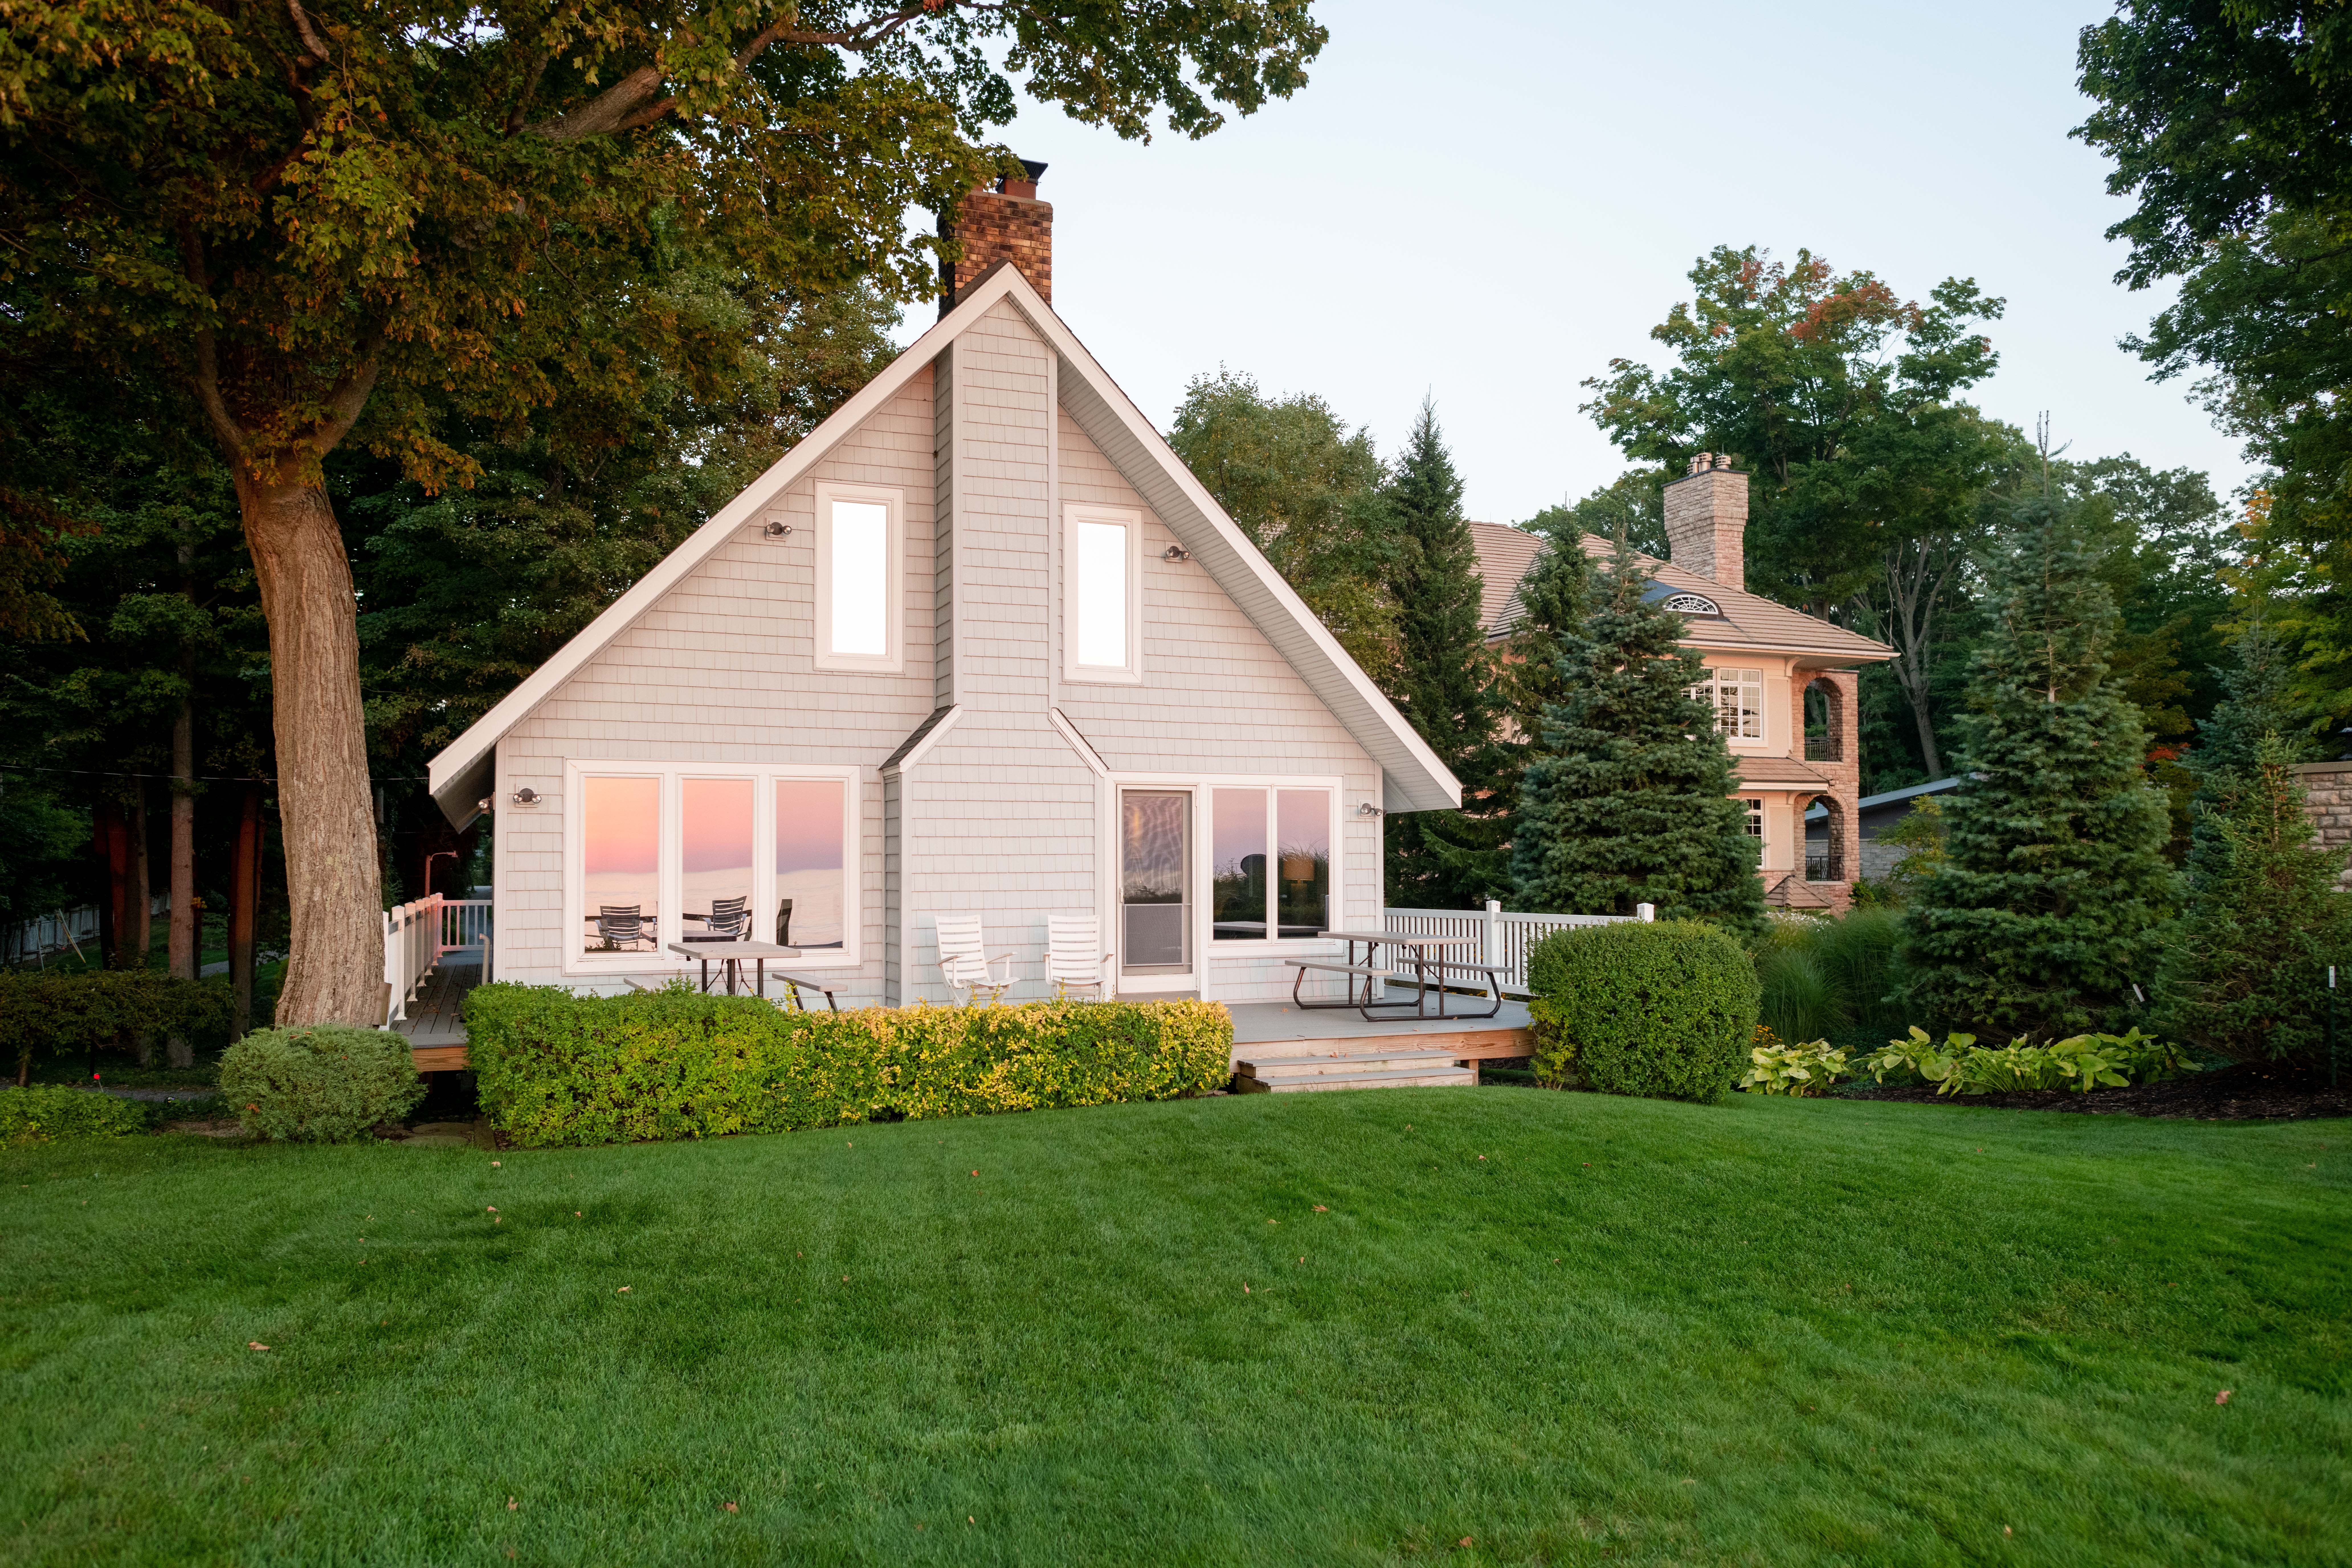 The home is cozy, spacious, and has gorgeous views to fulfill your Pure Michigan vacation dreams.